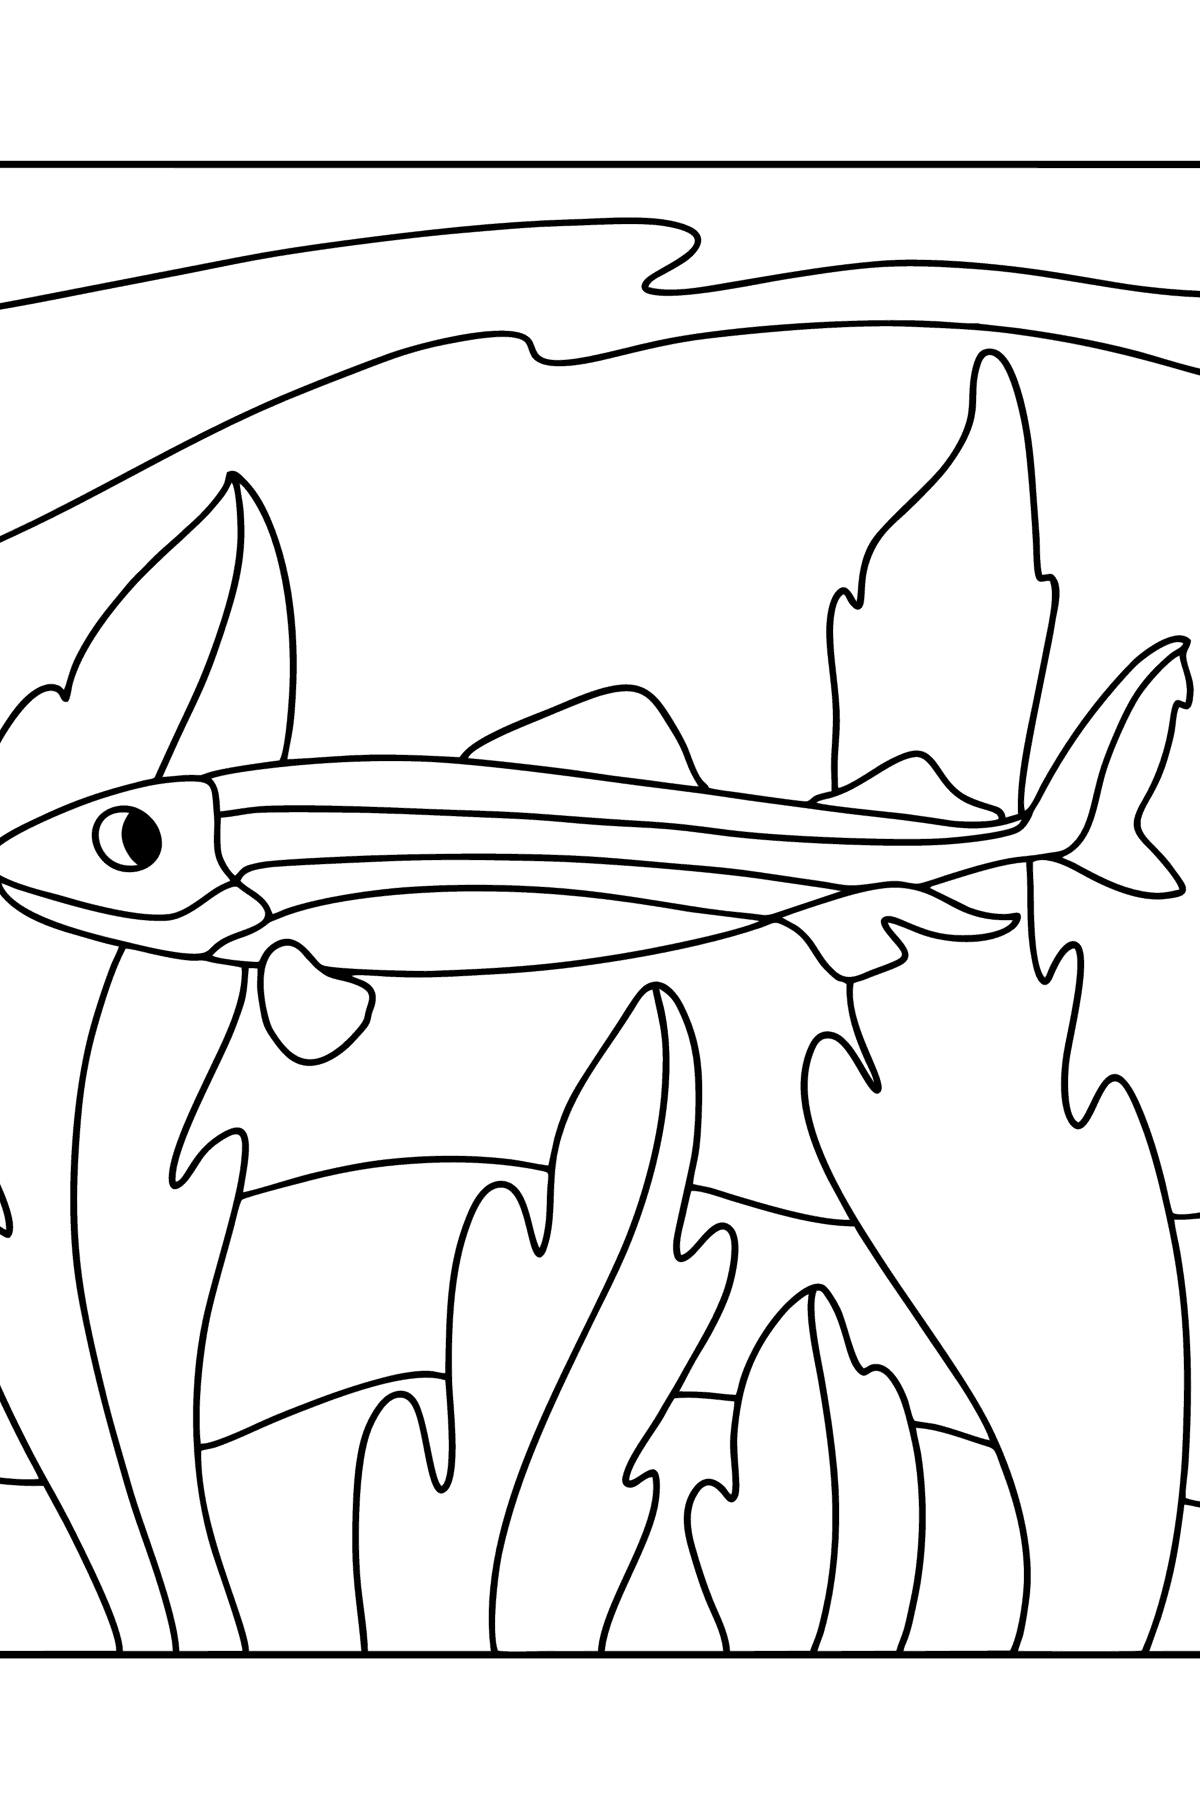 Crocodile Shark coloring page - Coloring Pages for Kids